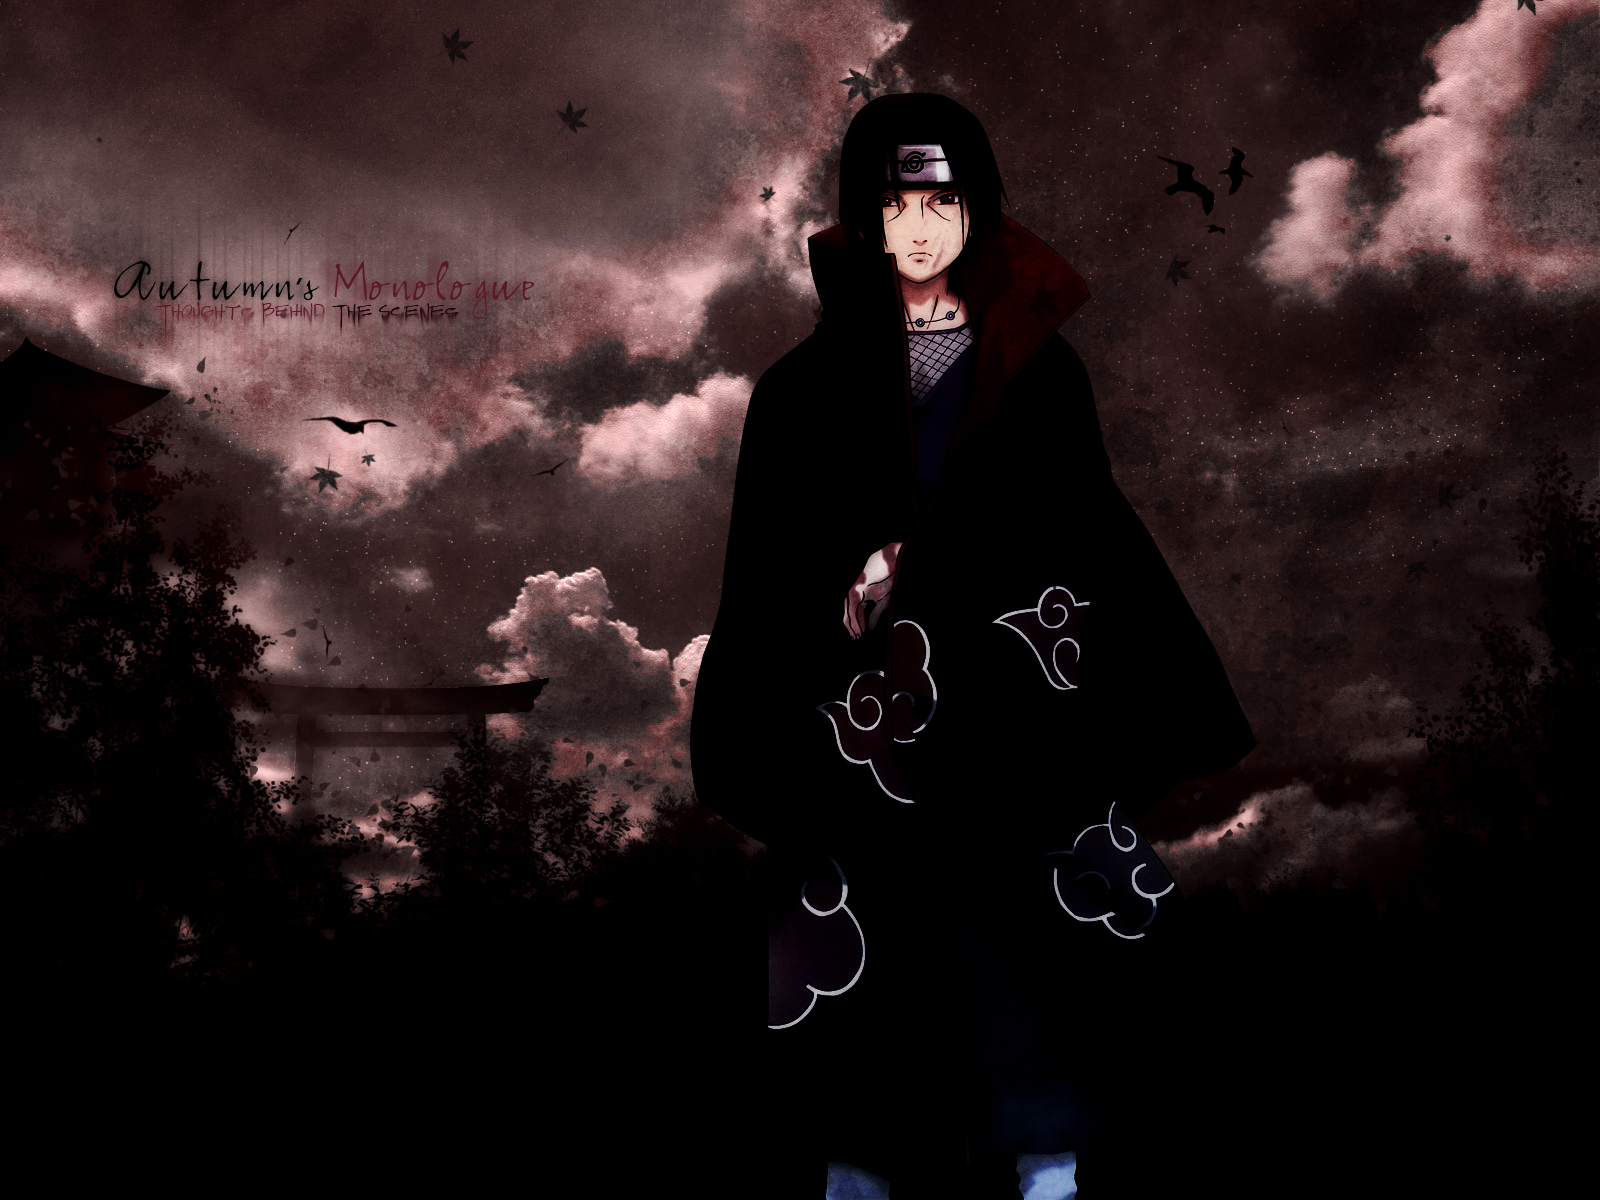 itachi wallpaper for mobile phone tablet desktop computer and other  devices HD and 4K wallpapers  Itachi Itachi uchiha Itachi uchiha art